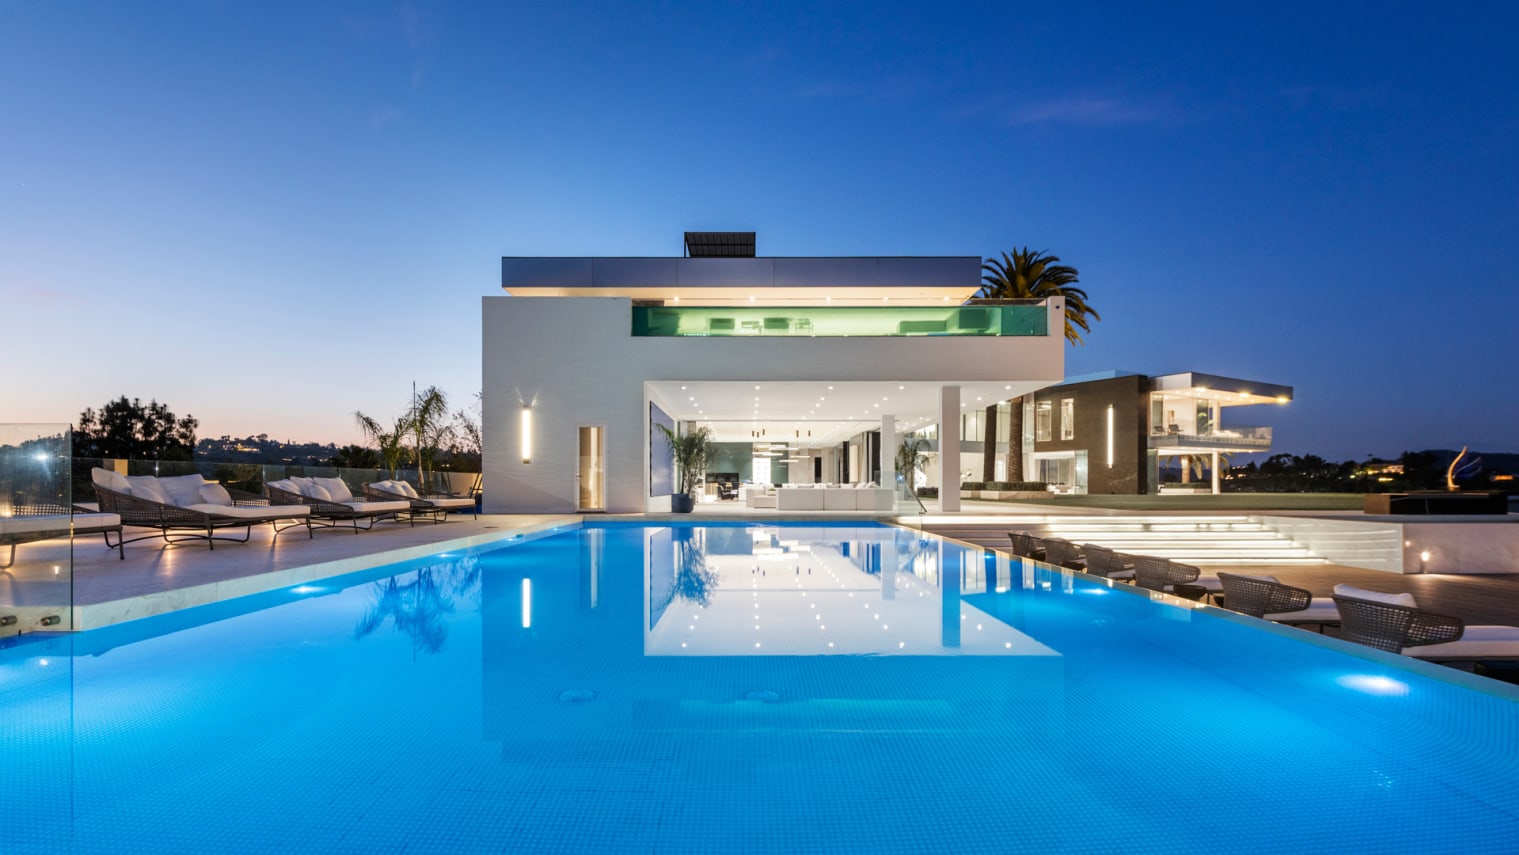 The One: This Los Angeles mansion could be the most expensive property in America